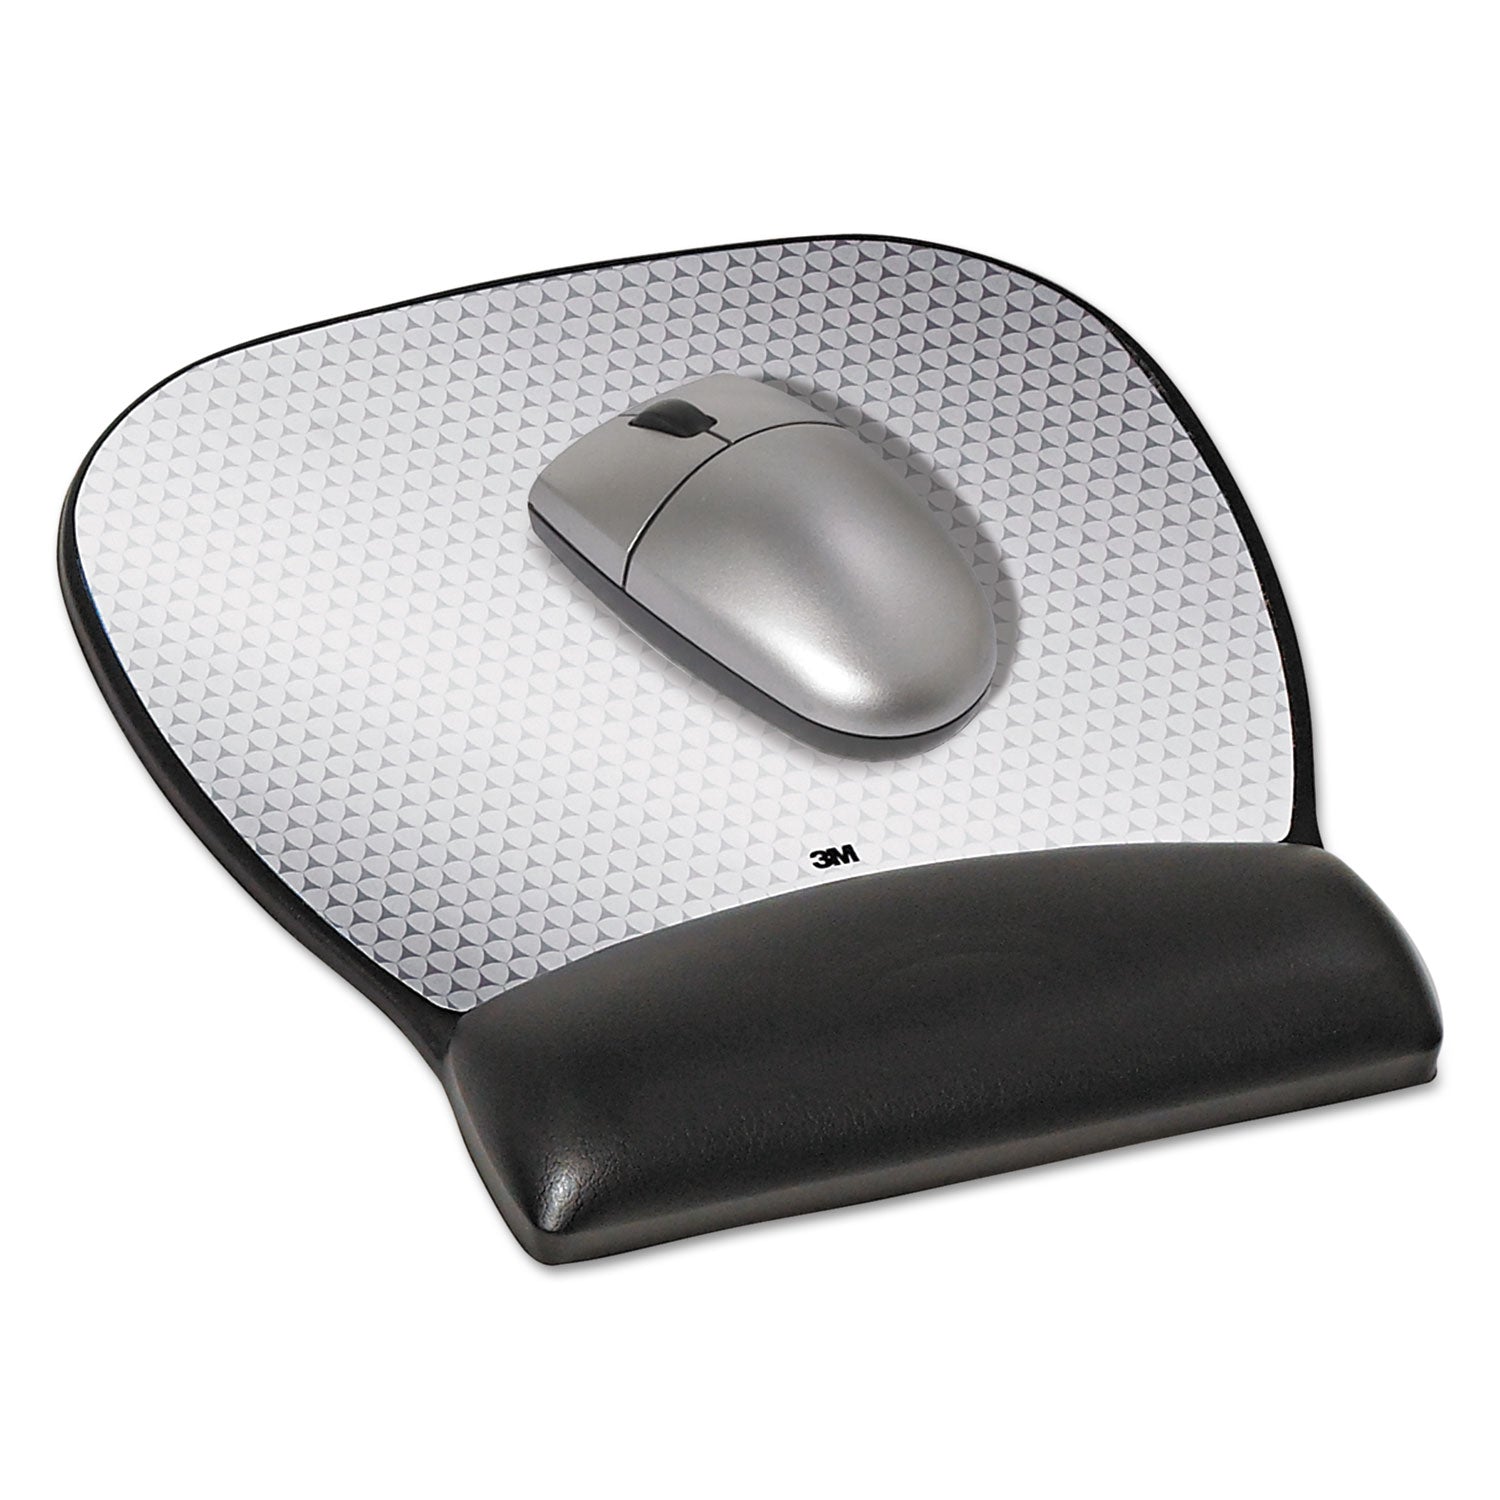 Antimicrobial Gel Large Mouse Pad with Wrist Rest, 9.25 x 8.75, Black - 